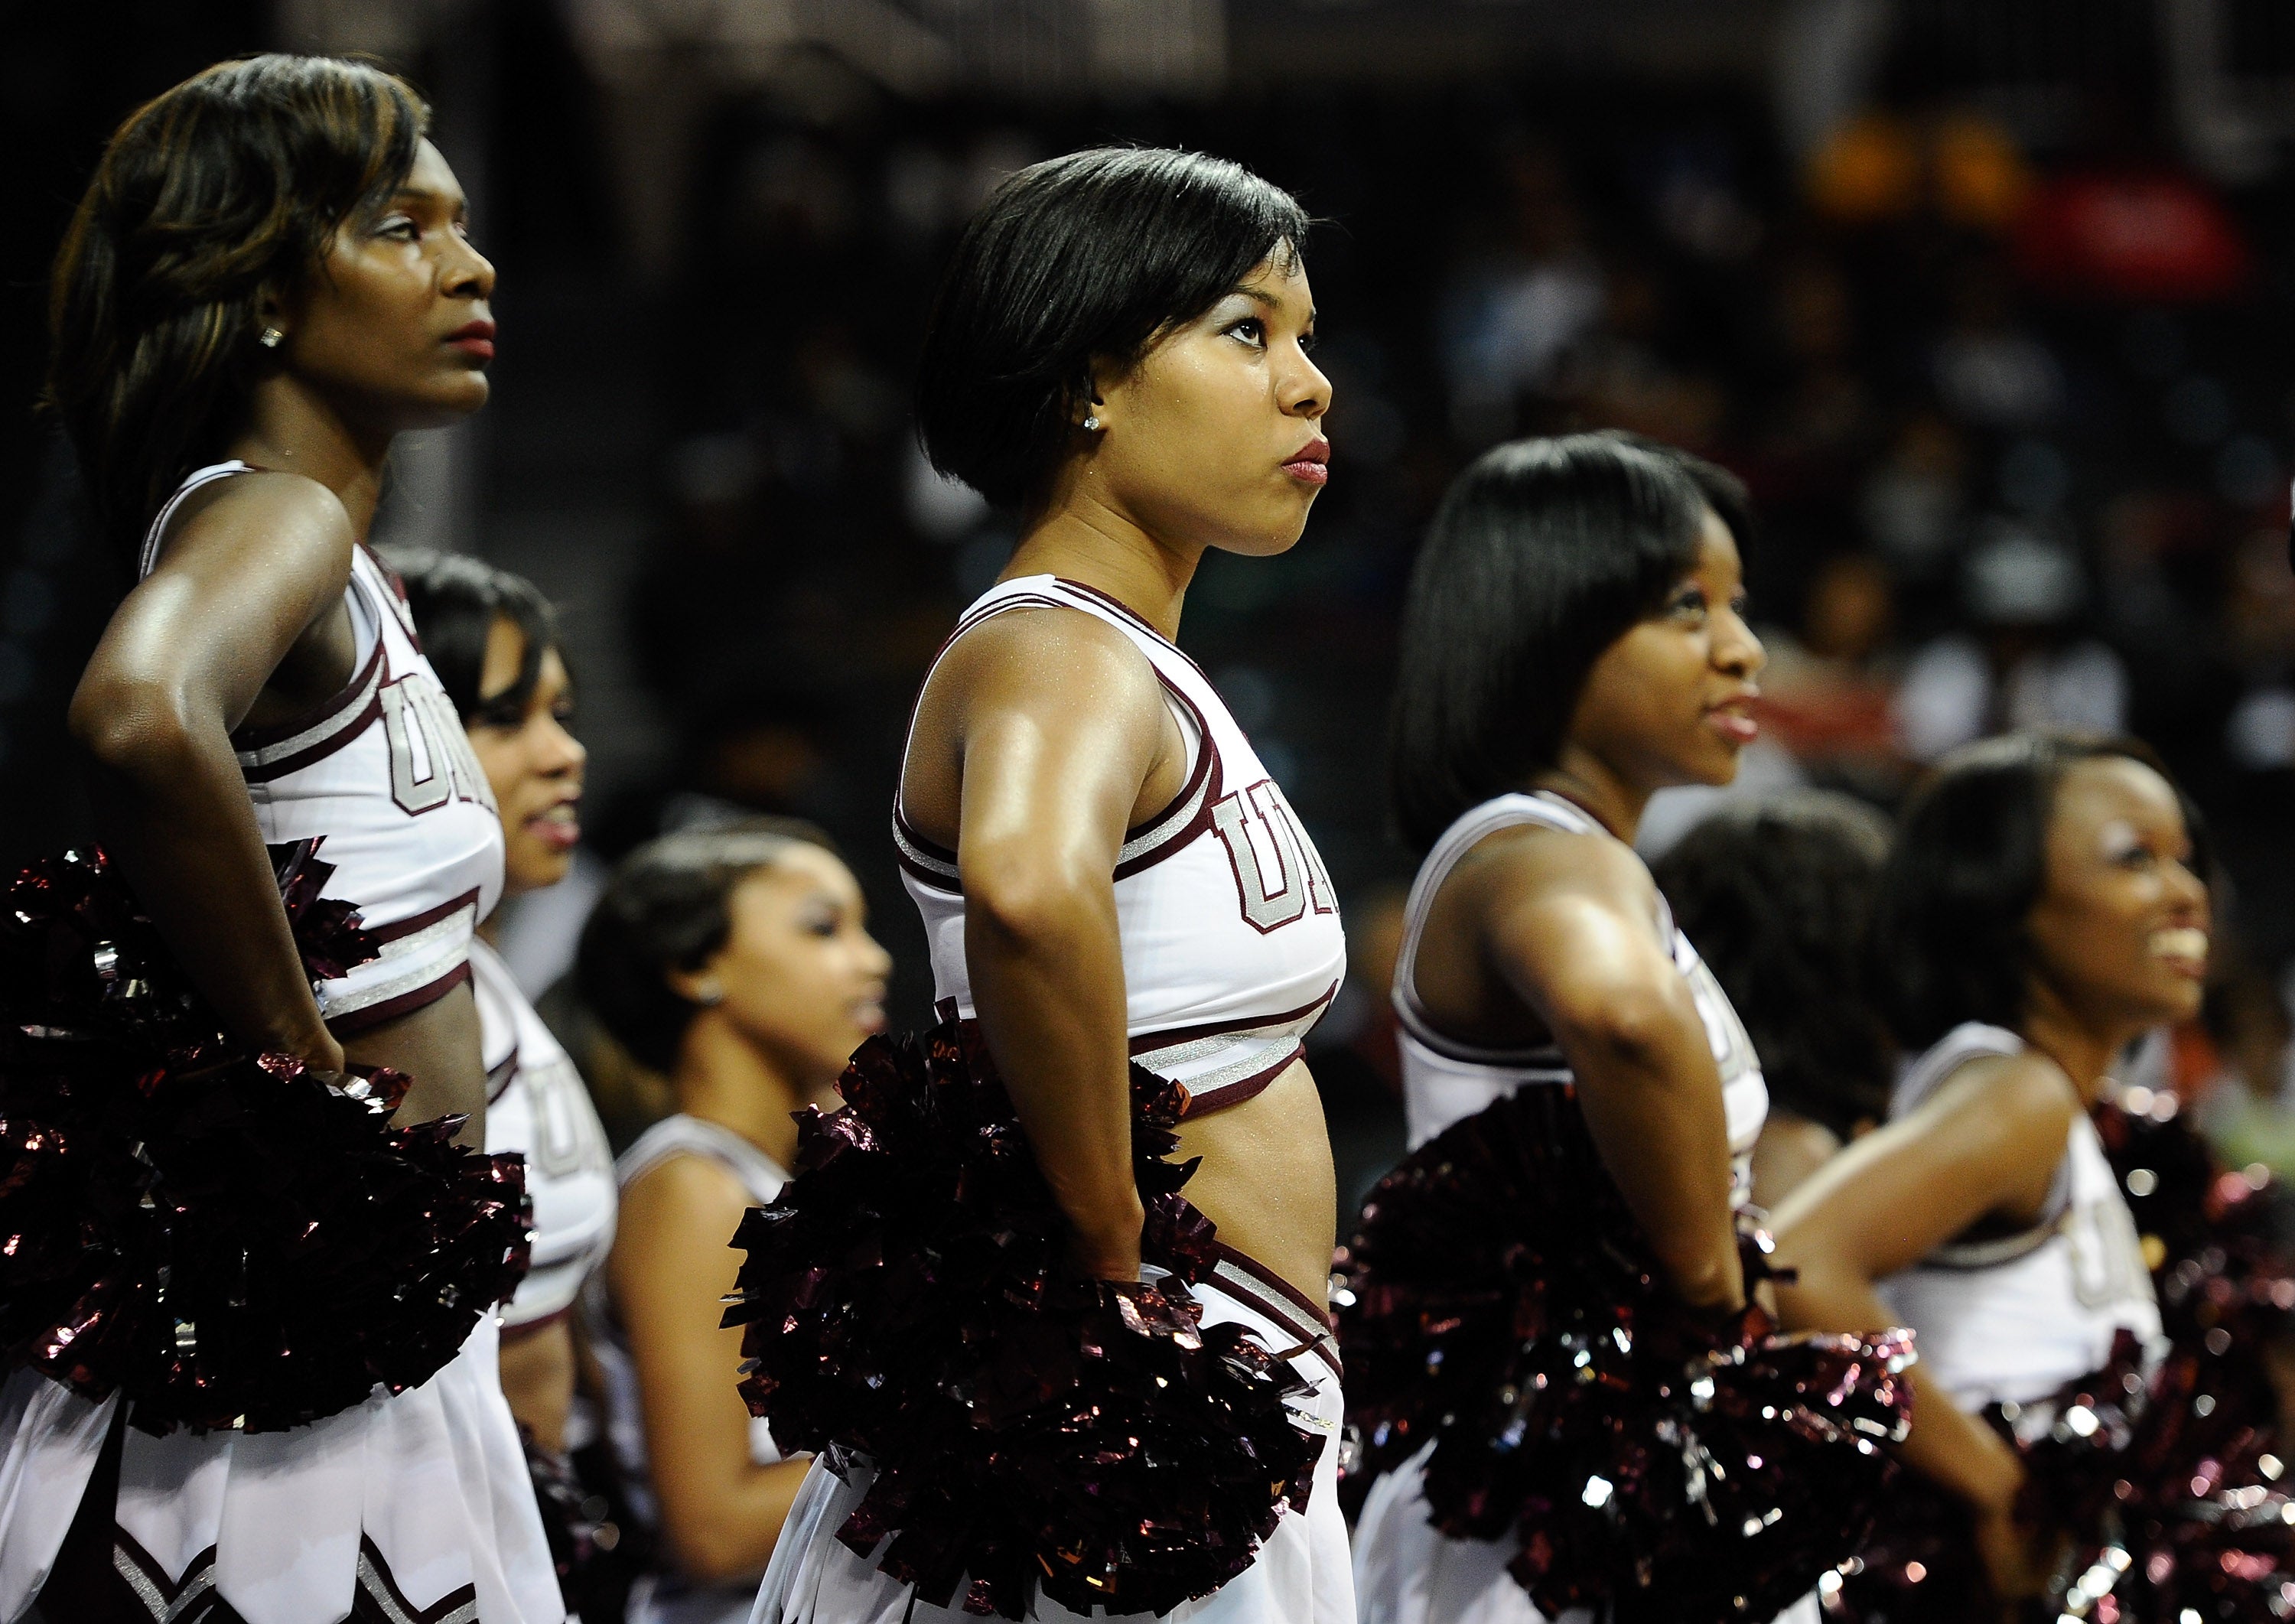 HBCU Homecoming Survival Kit: 17 Things You Can't Do Without